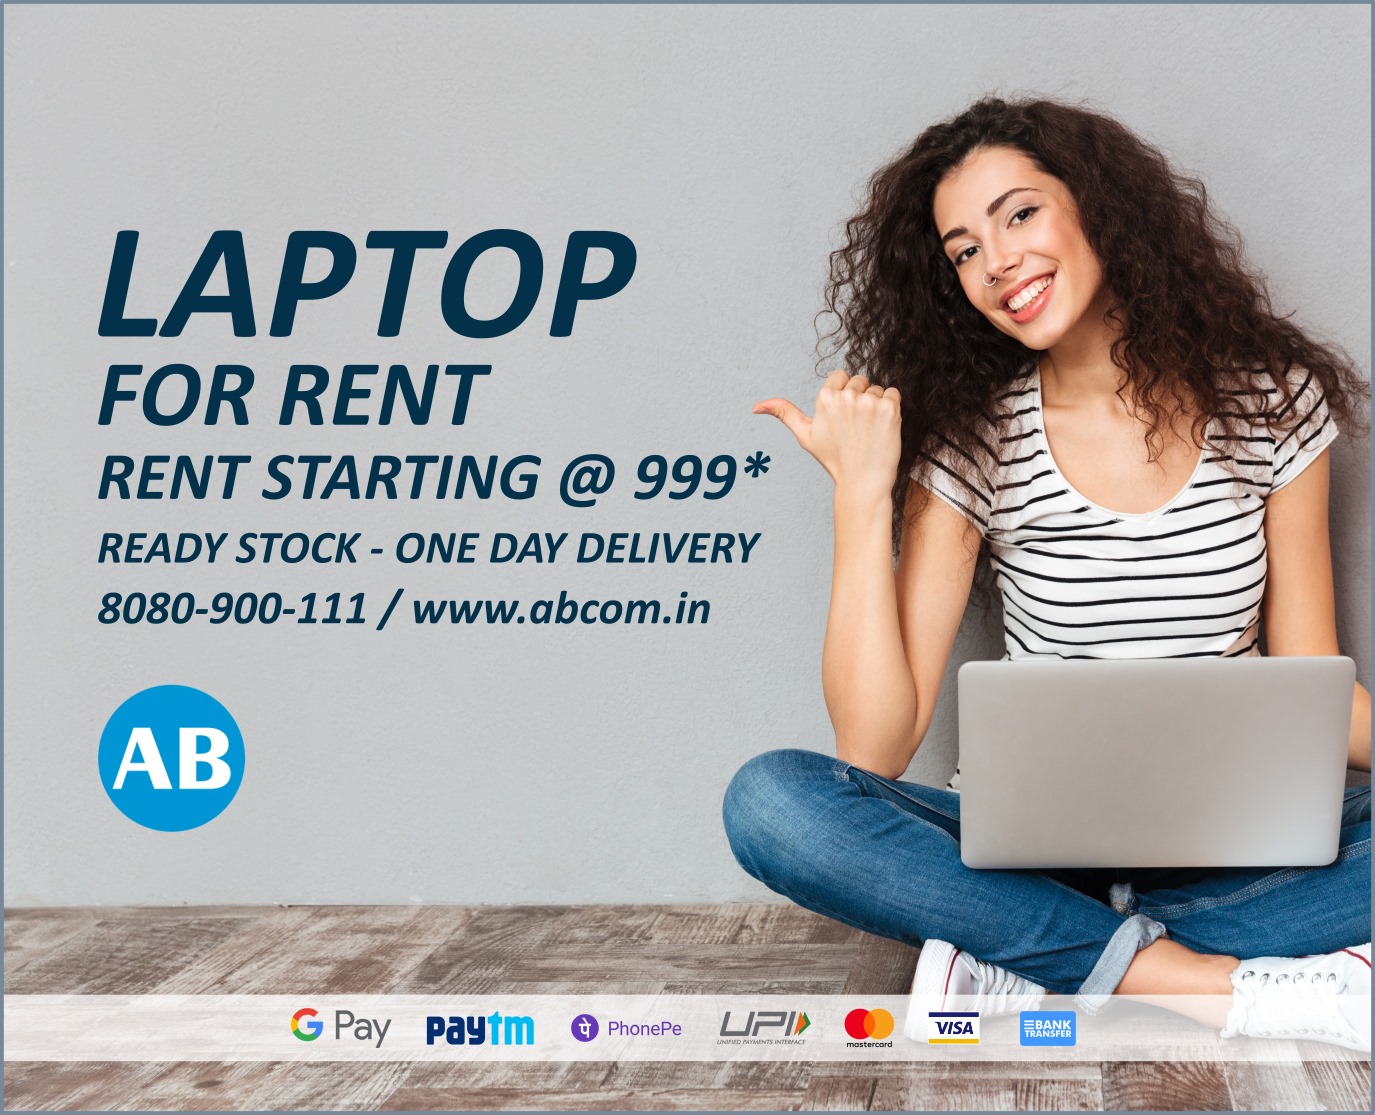 Laptop Rental Services in Mumbai by Rentopay: Your Solution for Convenience and Efficiency